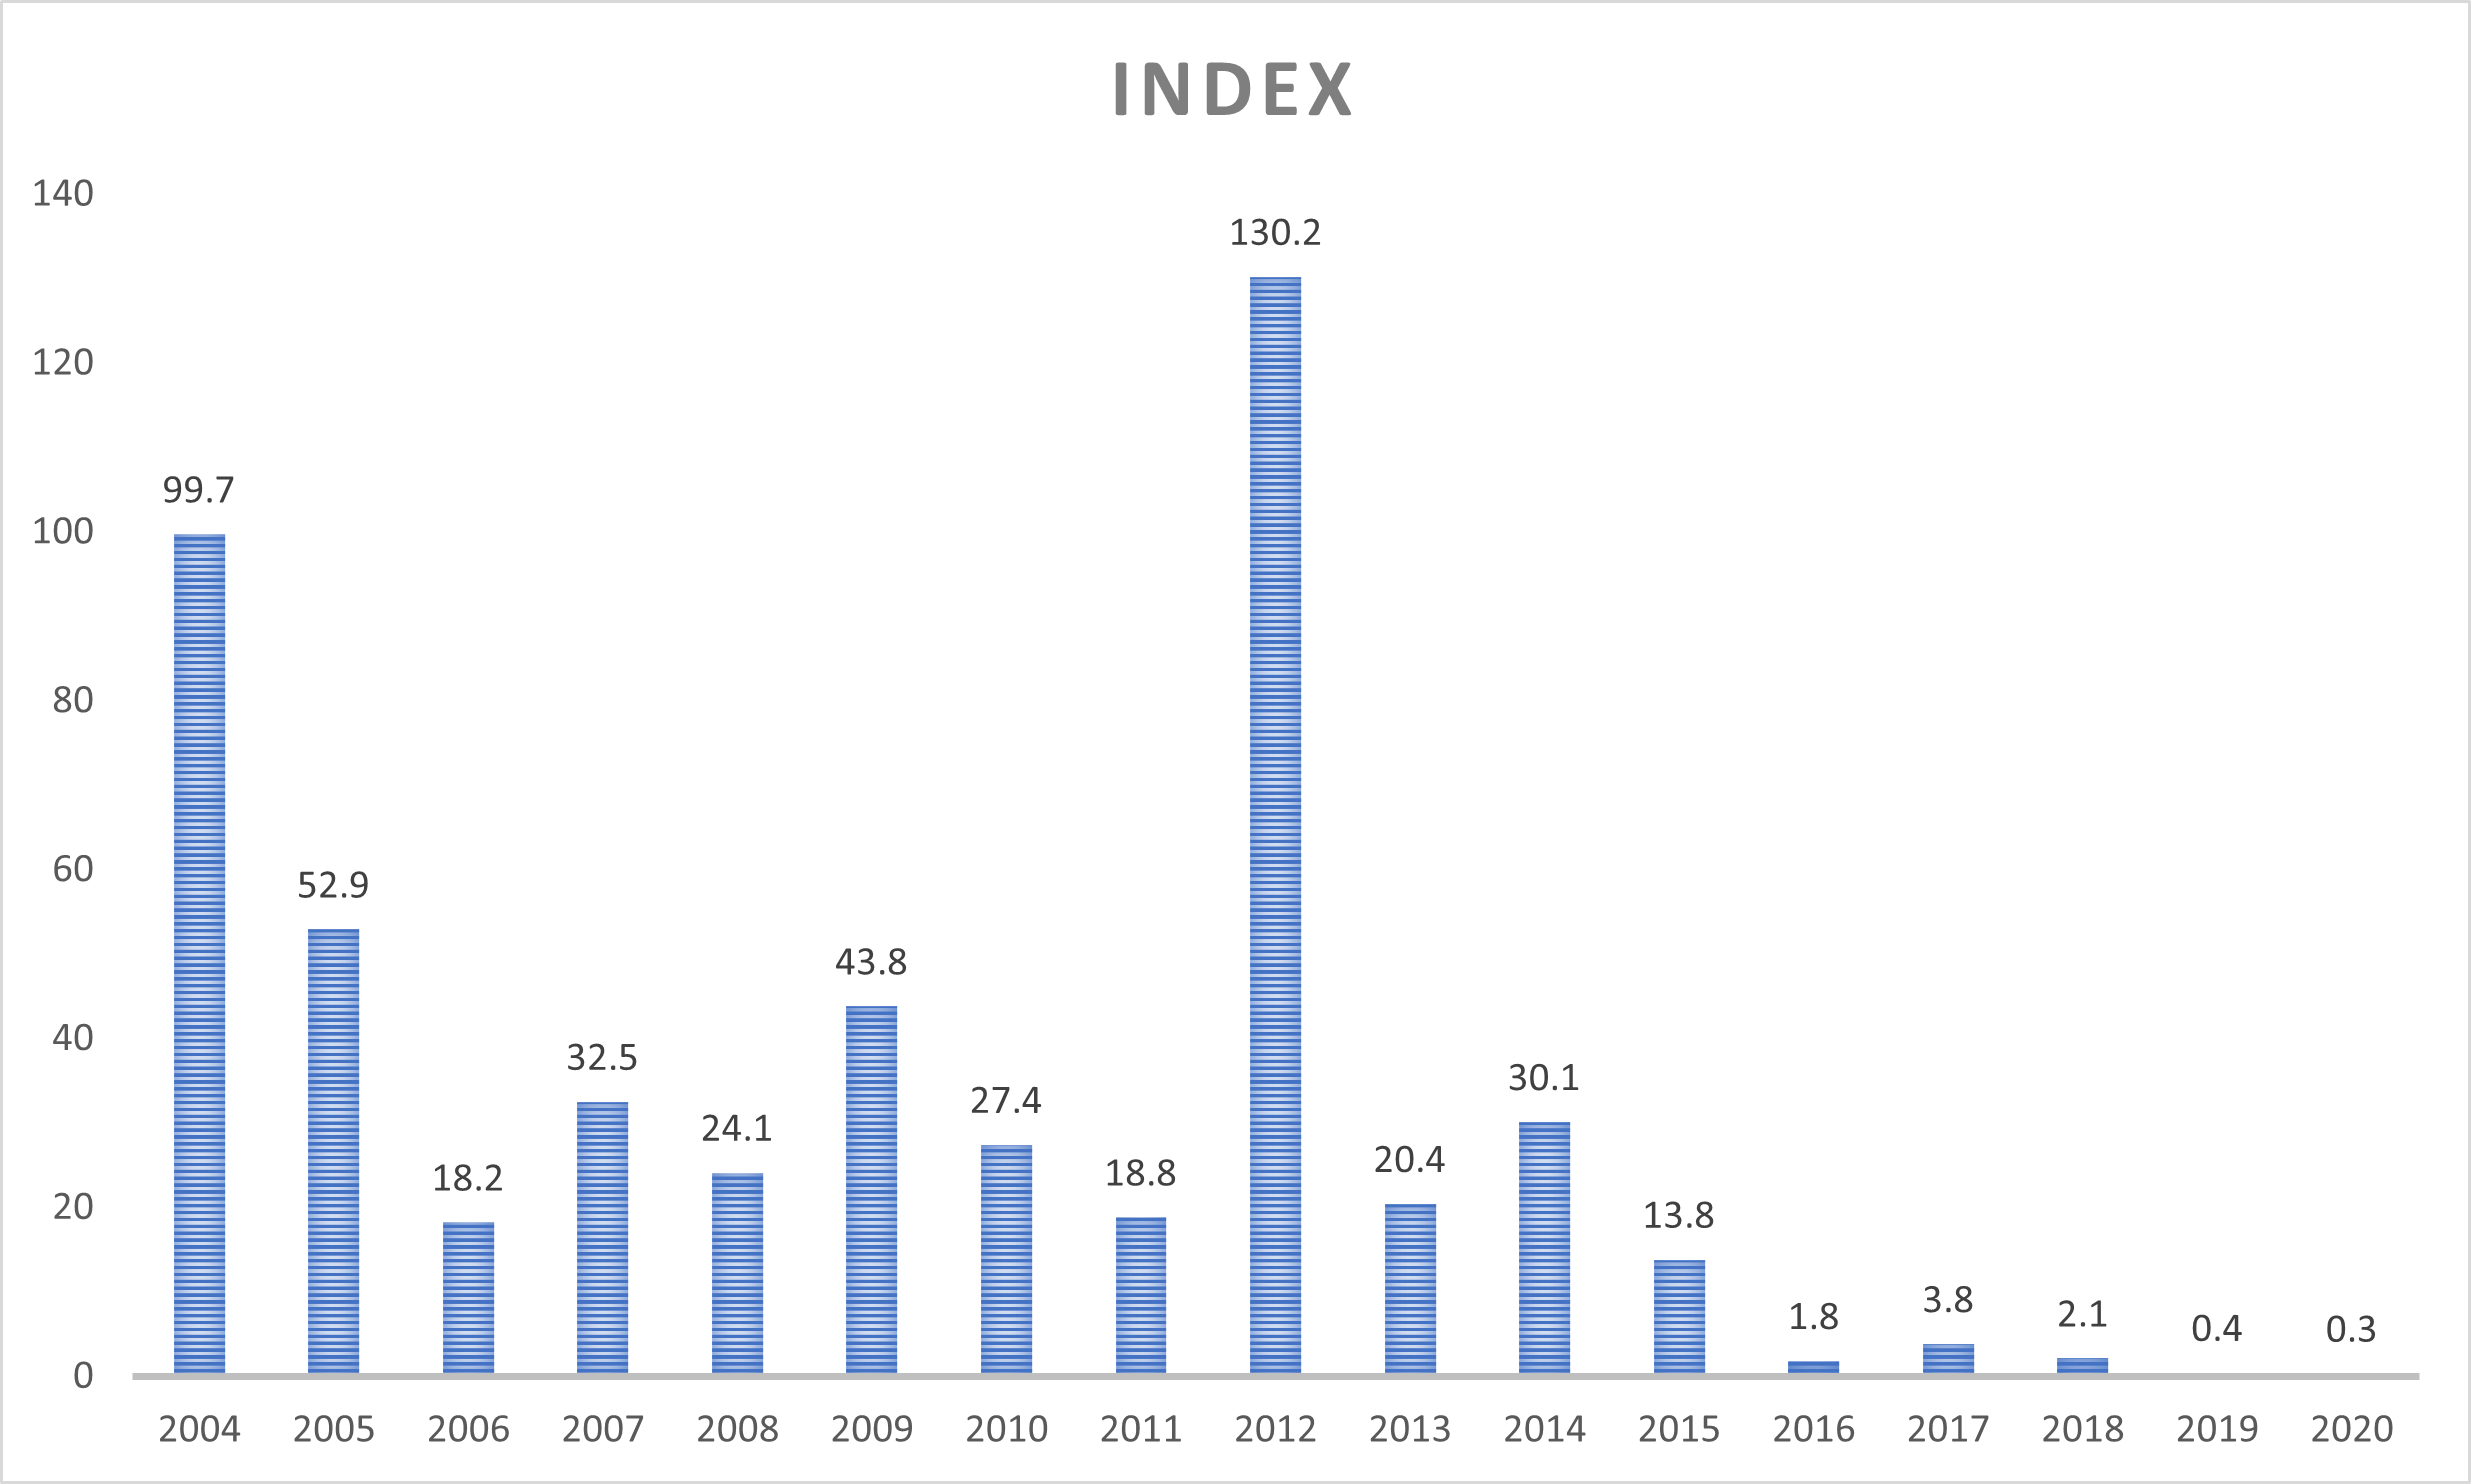 bar chart of delta smelt indices, via the Spring Kodiak Trawl samples, 2005-2020, showing peak of 130.2 in 2012, with a steady decline to 0.3 in 2020 - link opens image in new window